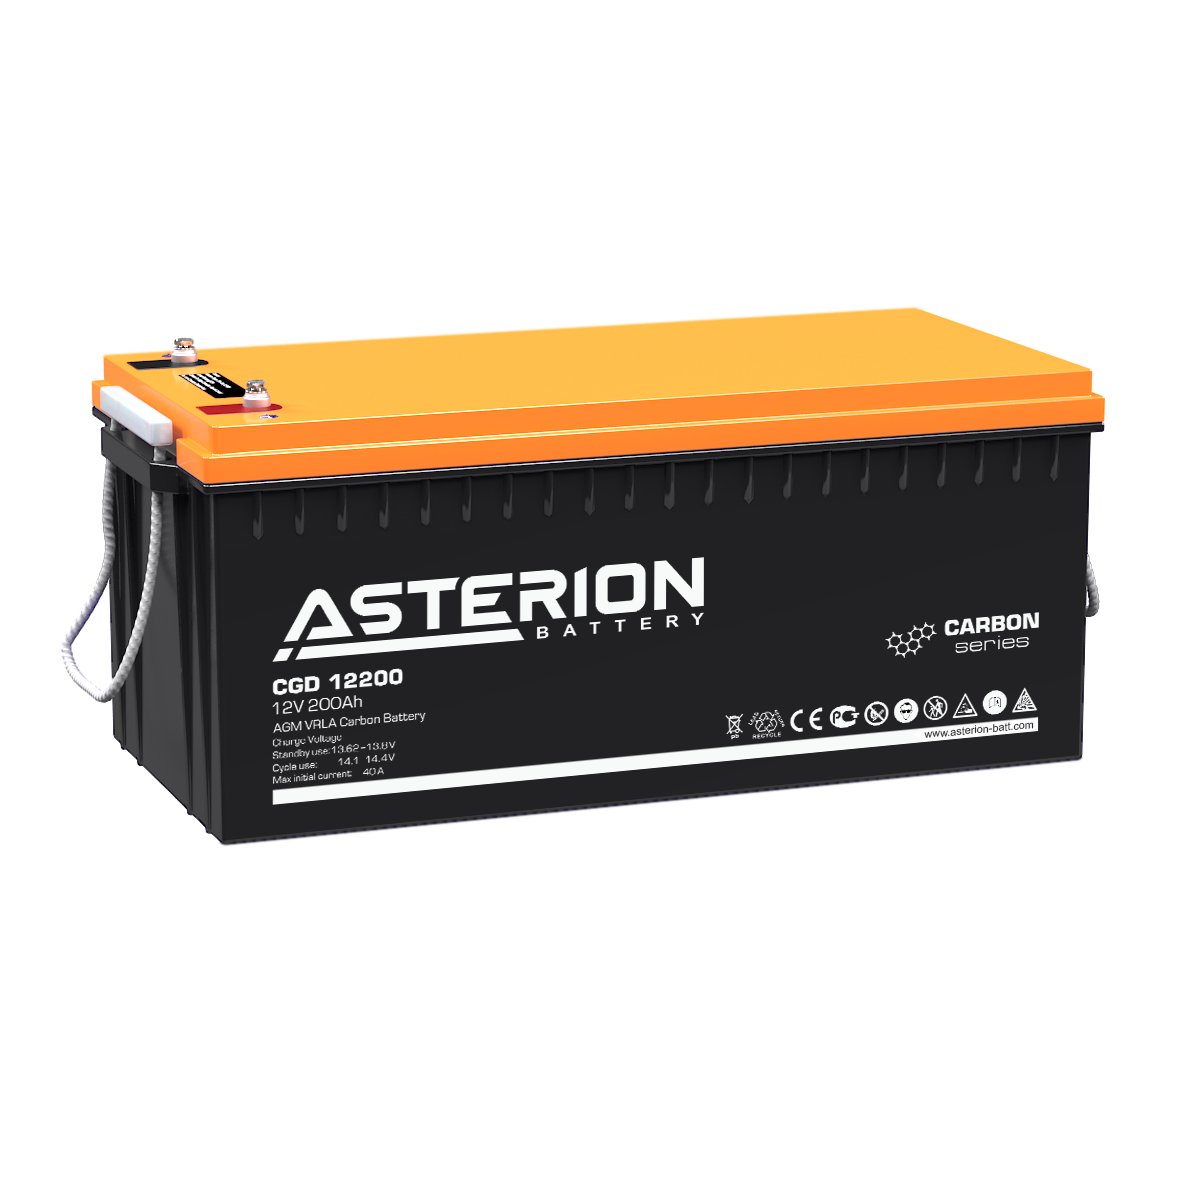 Asterion CGD 12200